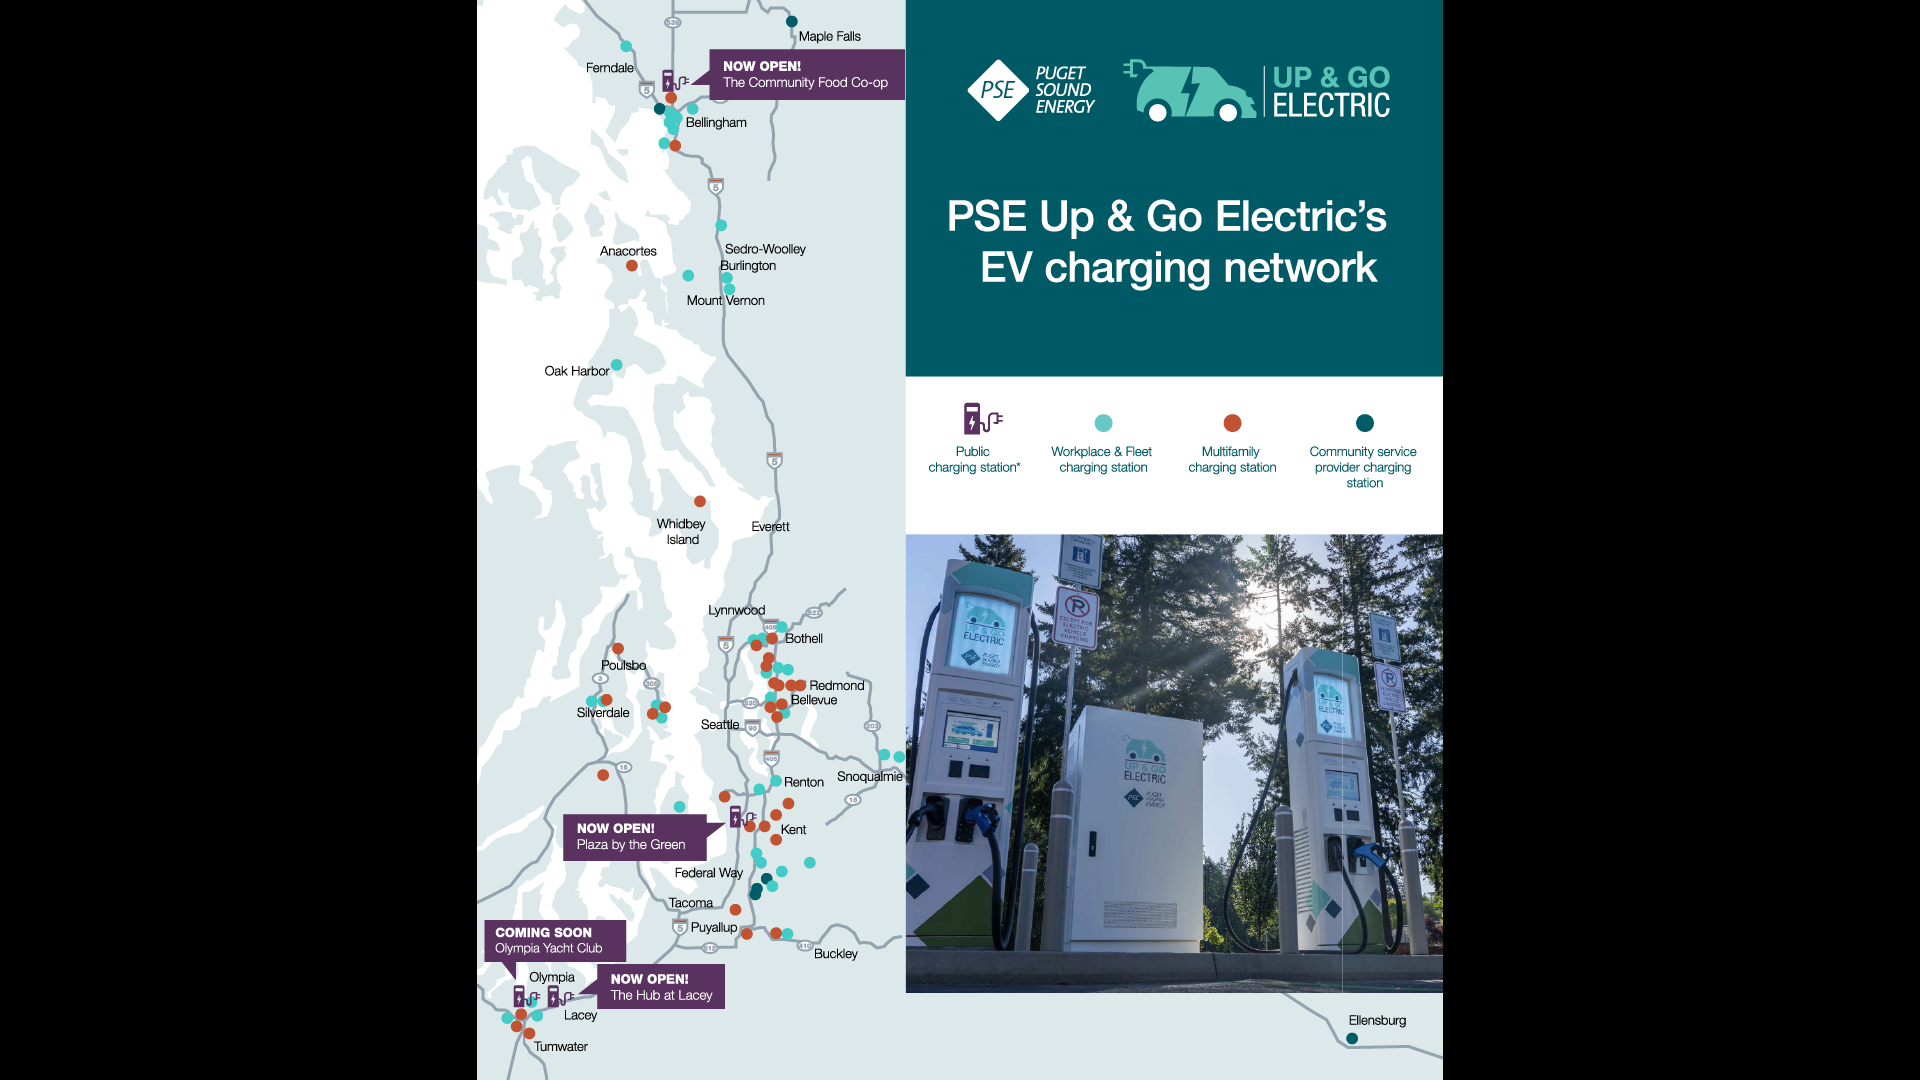 PSE Up & Go Electric's EV charging network